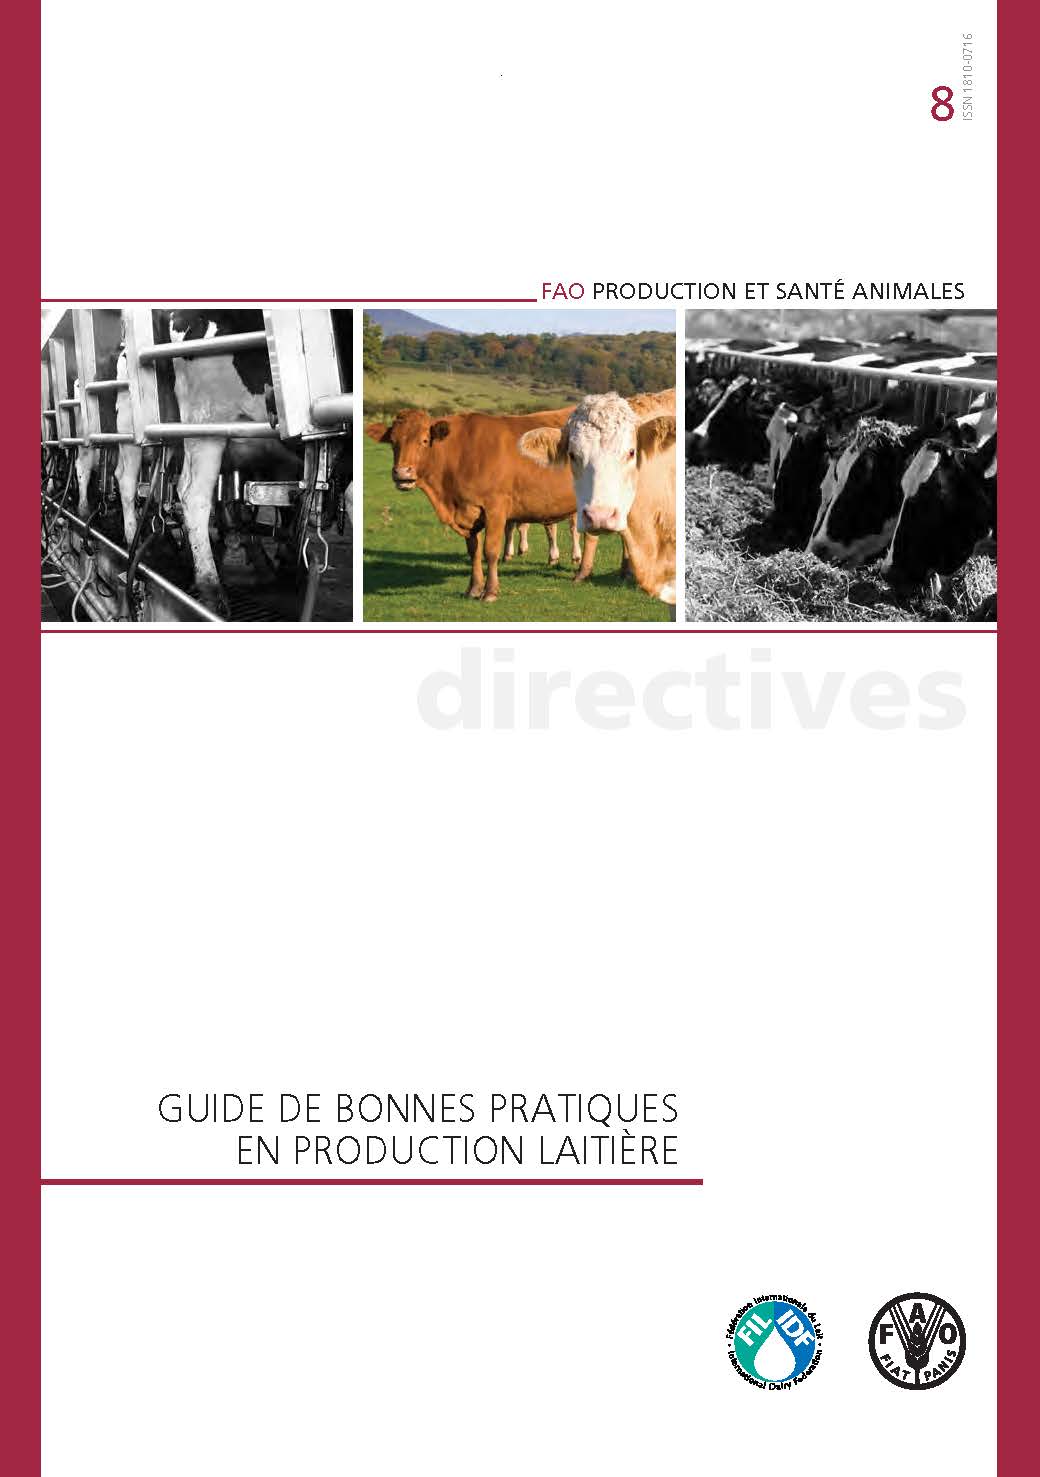 Guide to Good Dairy Farming Practice in French (2011) - FIL-IDF